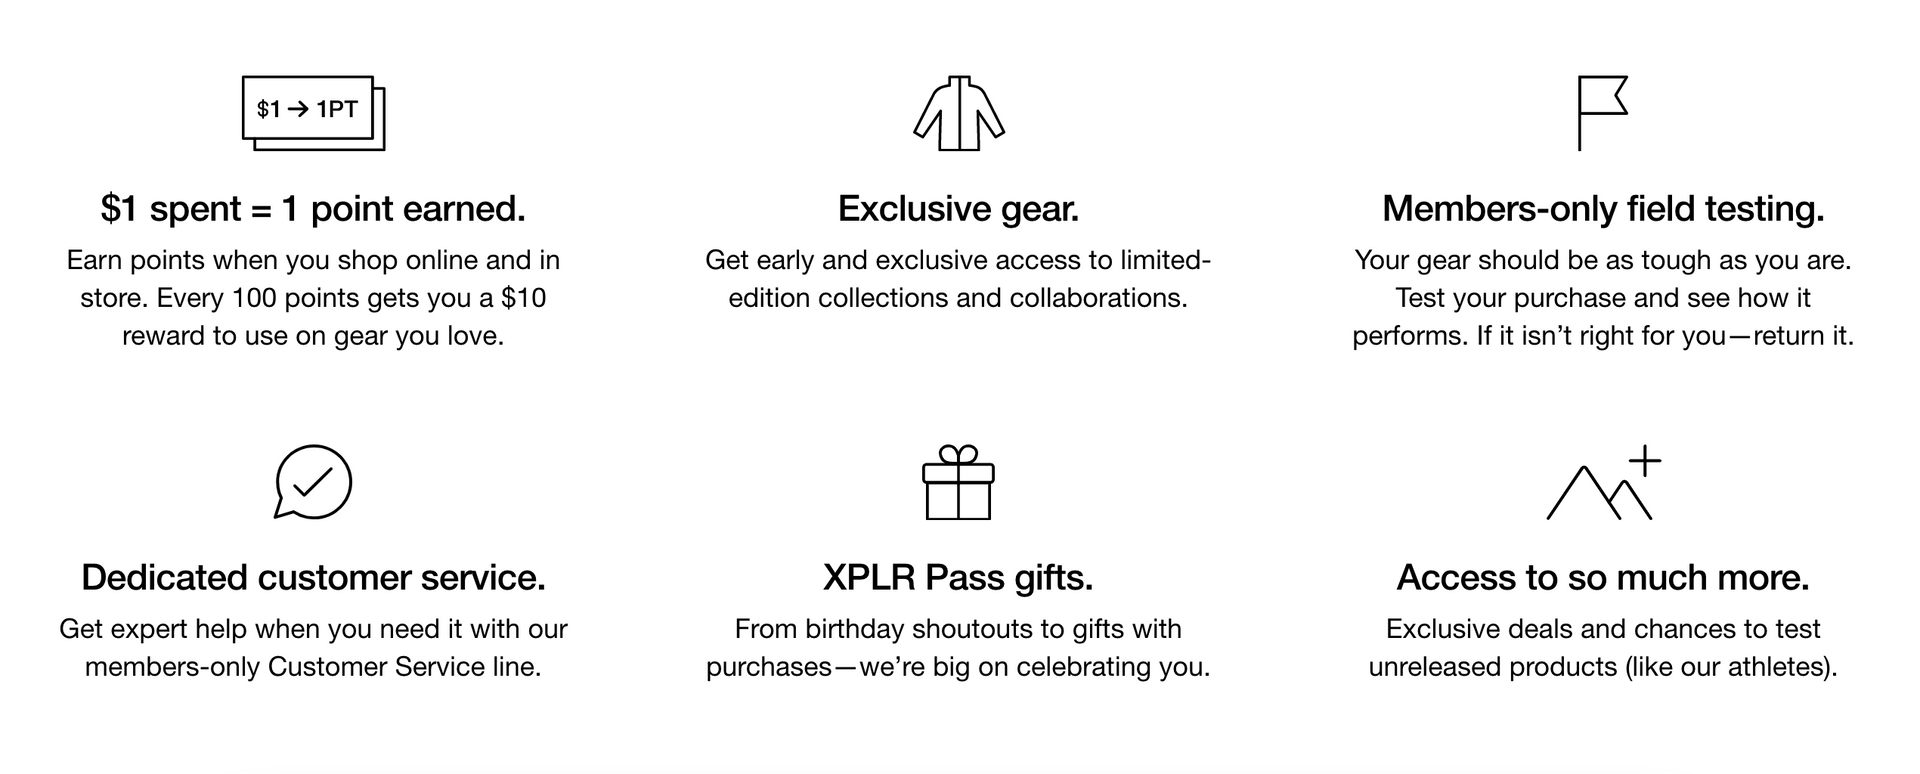 Examples of perks of The North Face's XPLR Pass program.